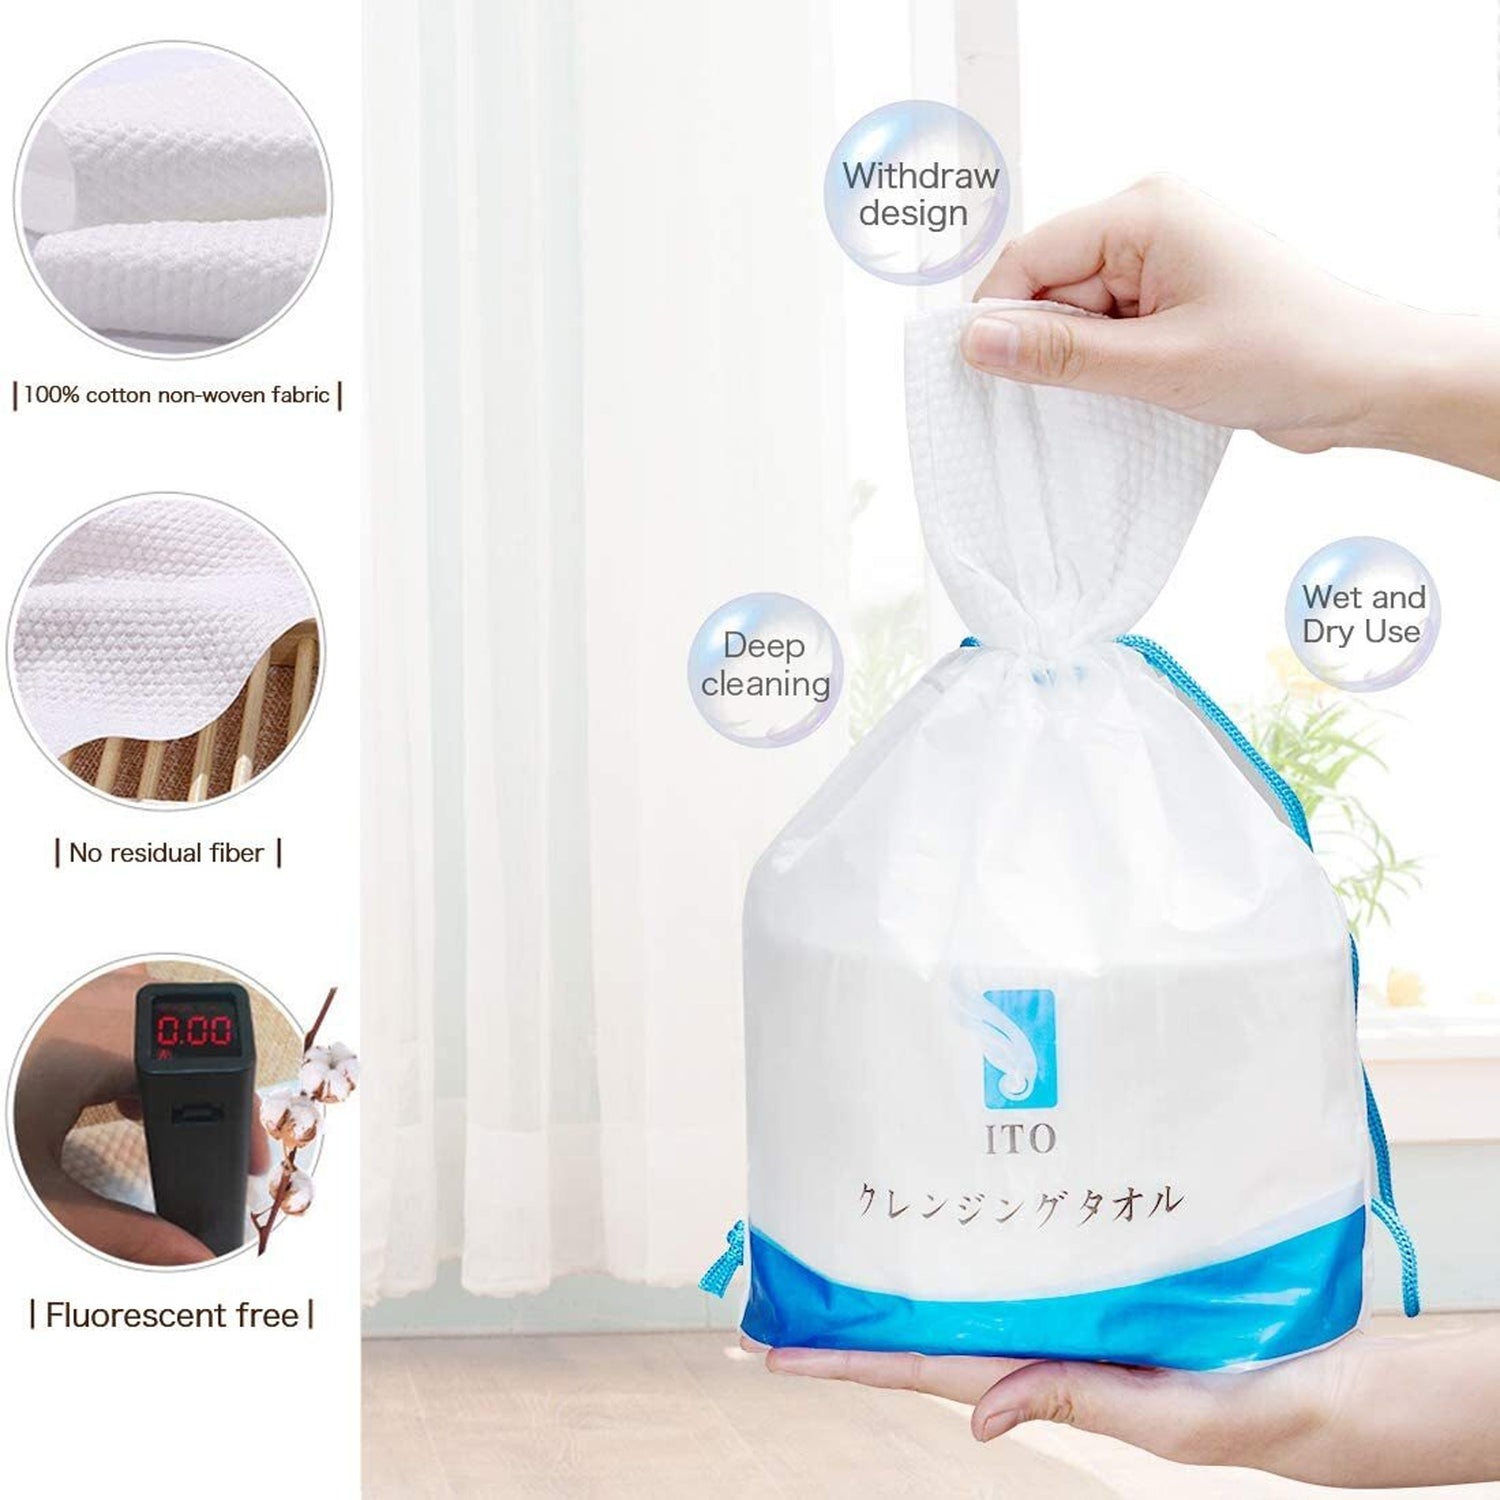 ITO Cleansing Disposable Towel